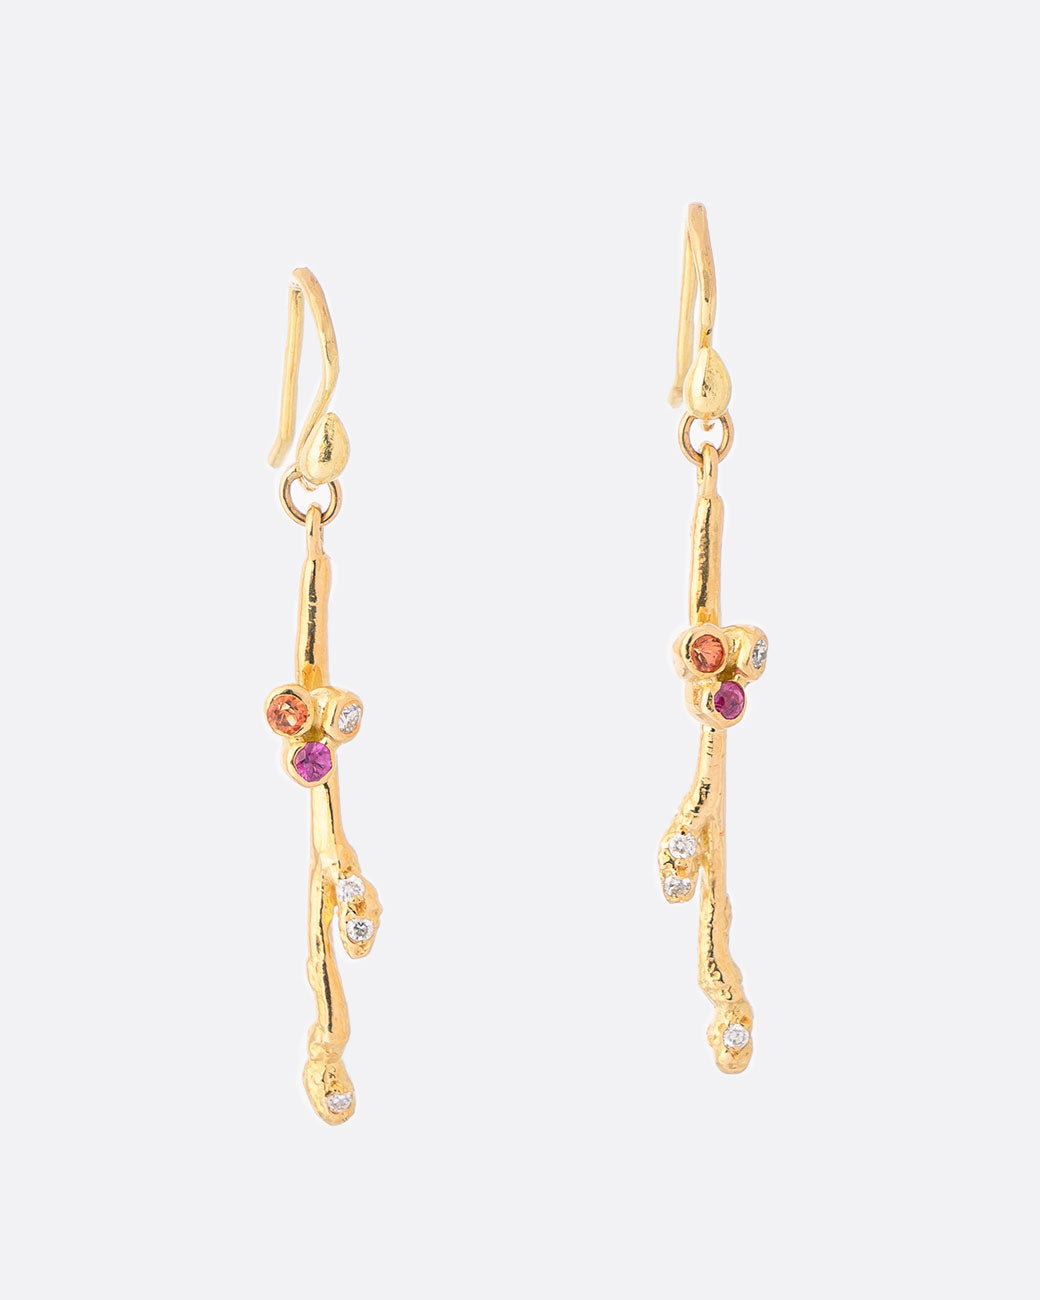 18k yellow gold brand earrings with pink sapphires, orange sapphires, and diamonds by Kimberlin Brown, shown from the front.